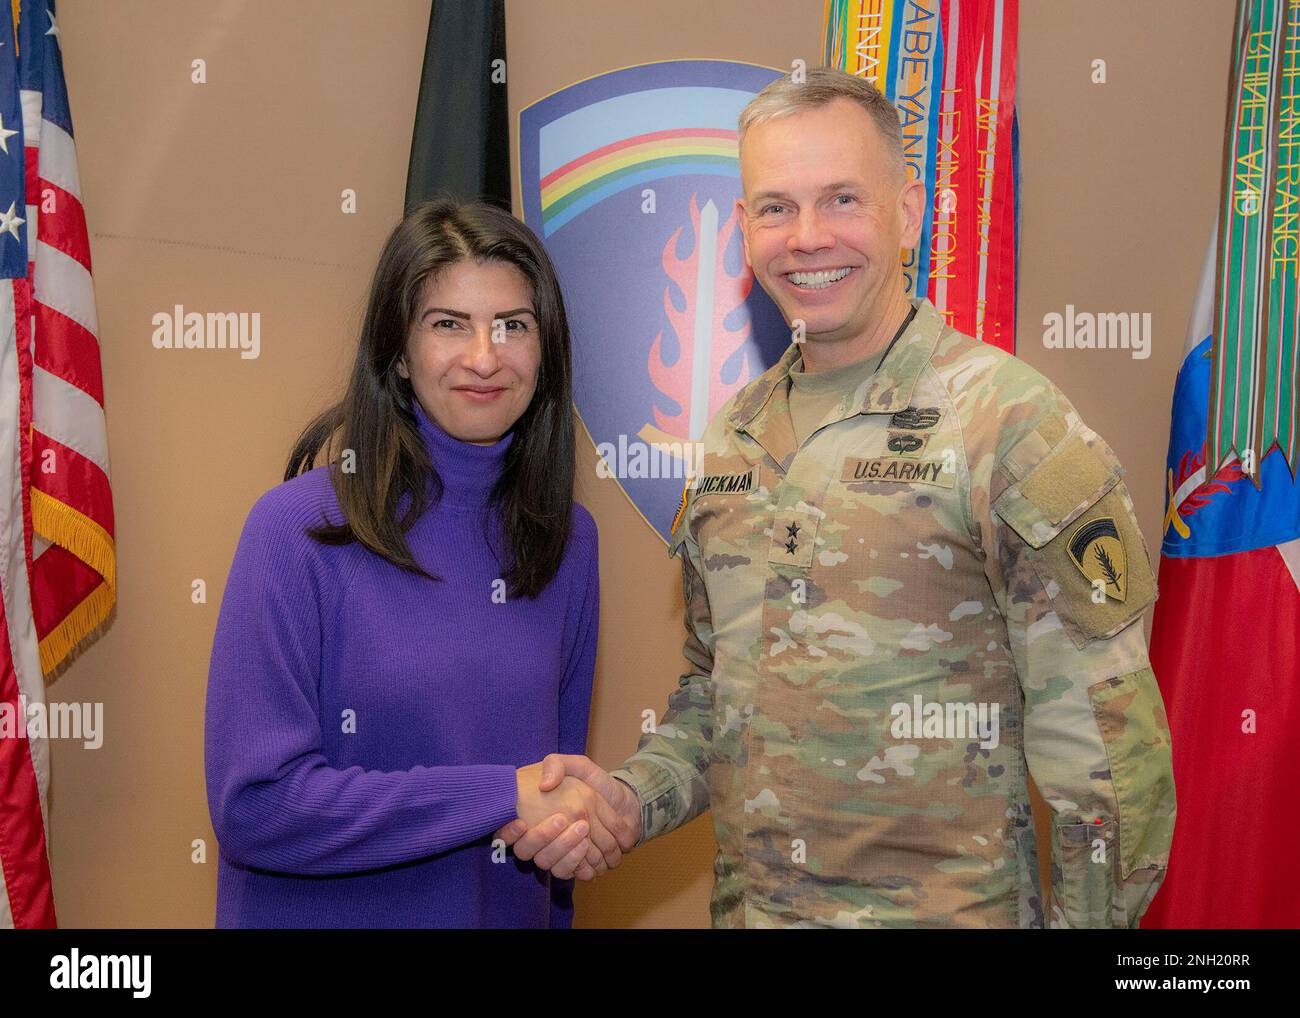 Ms. Serap Gueler MdB, Member of the Bundestag and of the Bundestag  Defense Committee, meets with Maj. Gen. Michael D. Wickman, U.S. Army Europe and Africa Chief of Staff at USAREUR-AF HQ in Wiesbaden, Germany, Dec 8, 2022.  She met with senior USAREUR-AF staff to discuss the security situation in Europe and efforts to support Ukraine in the conflict with Russia. Stock Photo